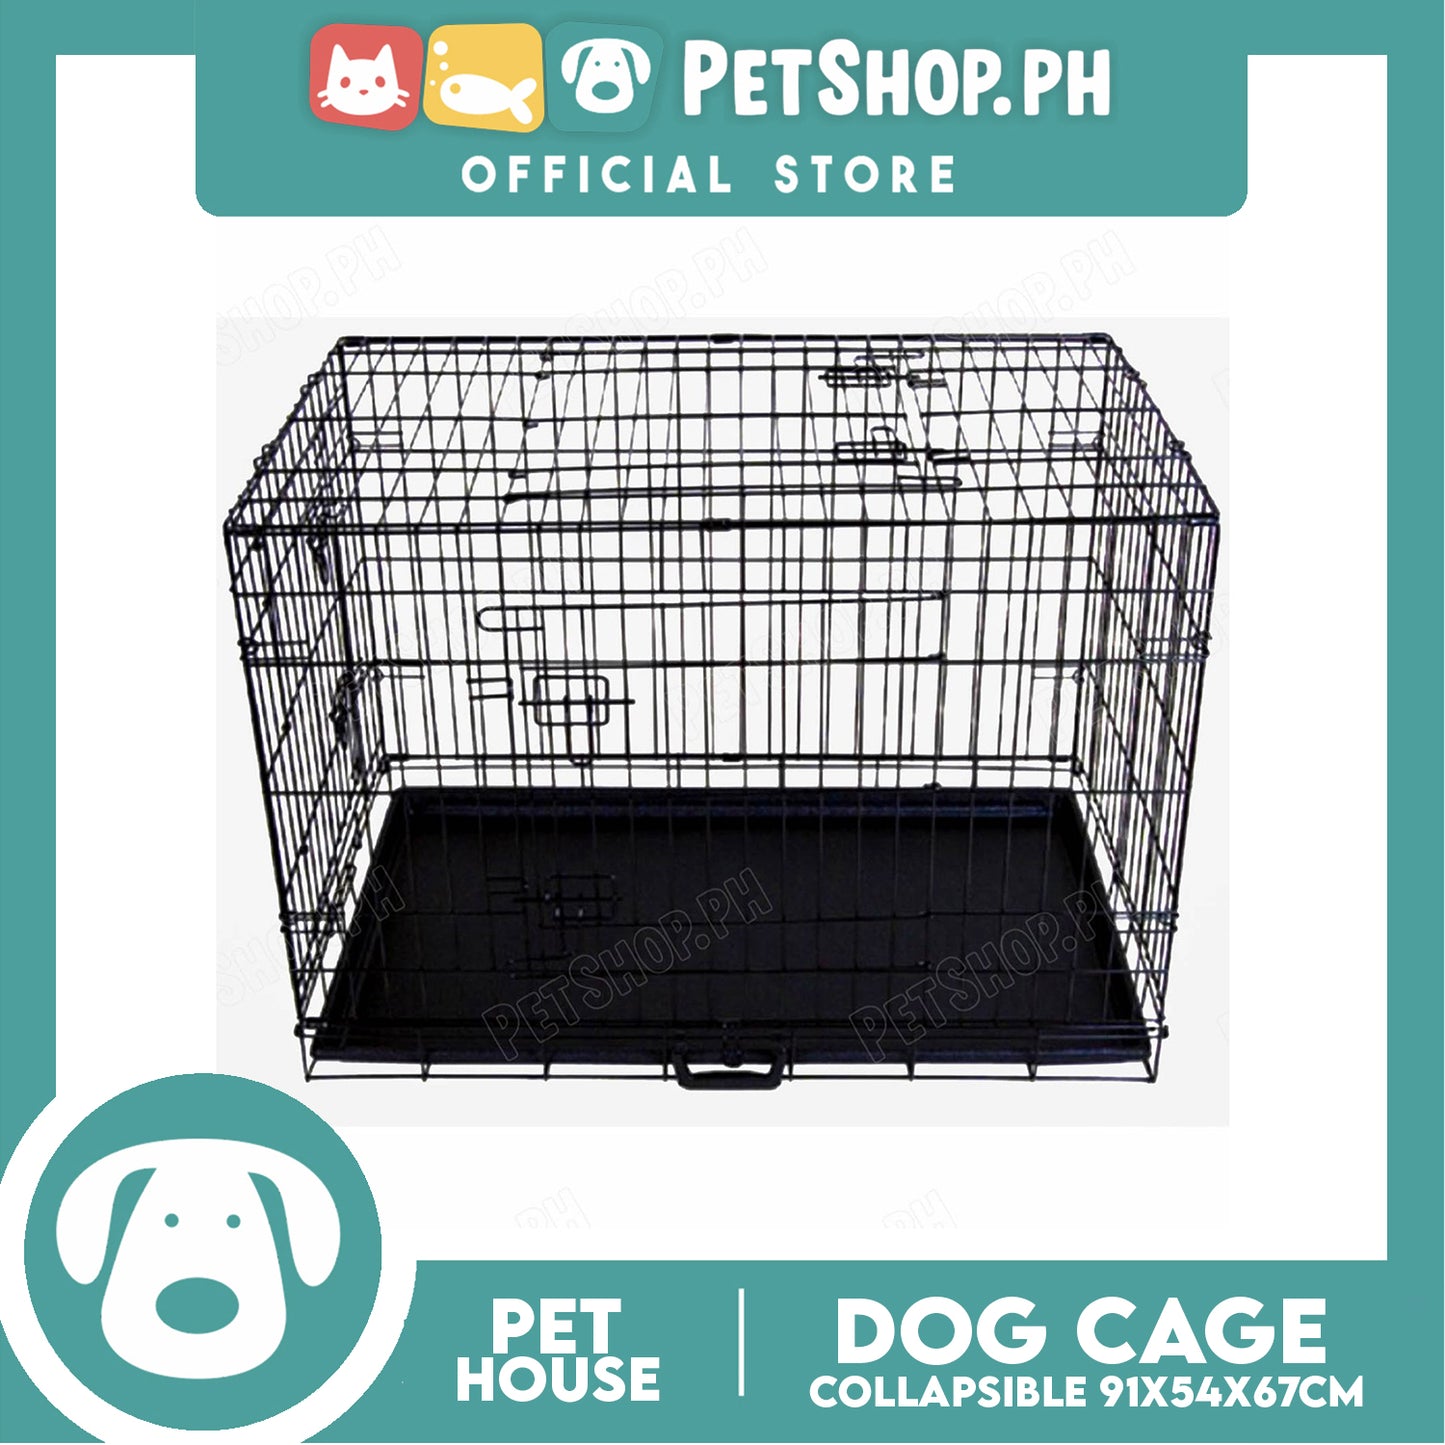 Collapsible Dog Cage 91x54x67